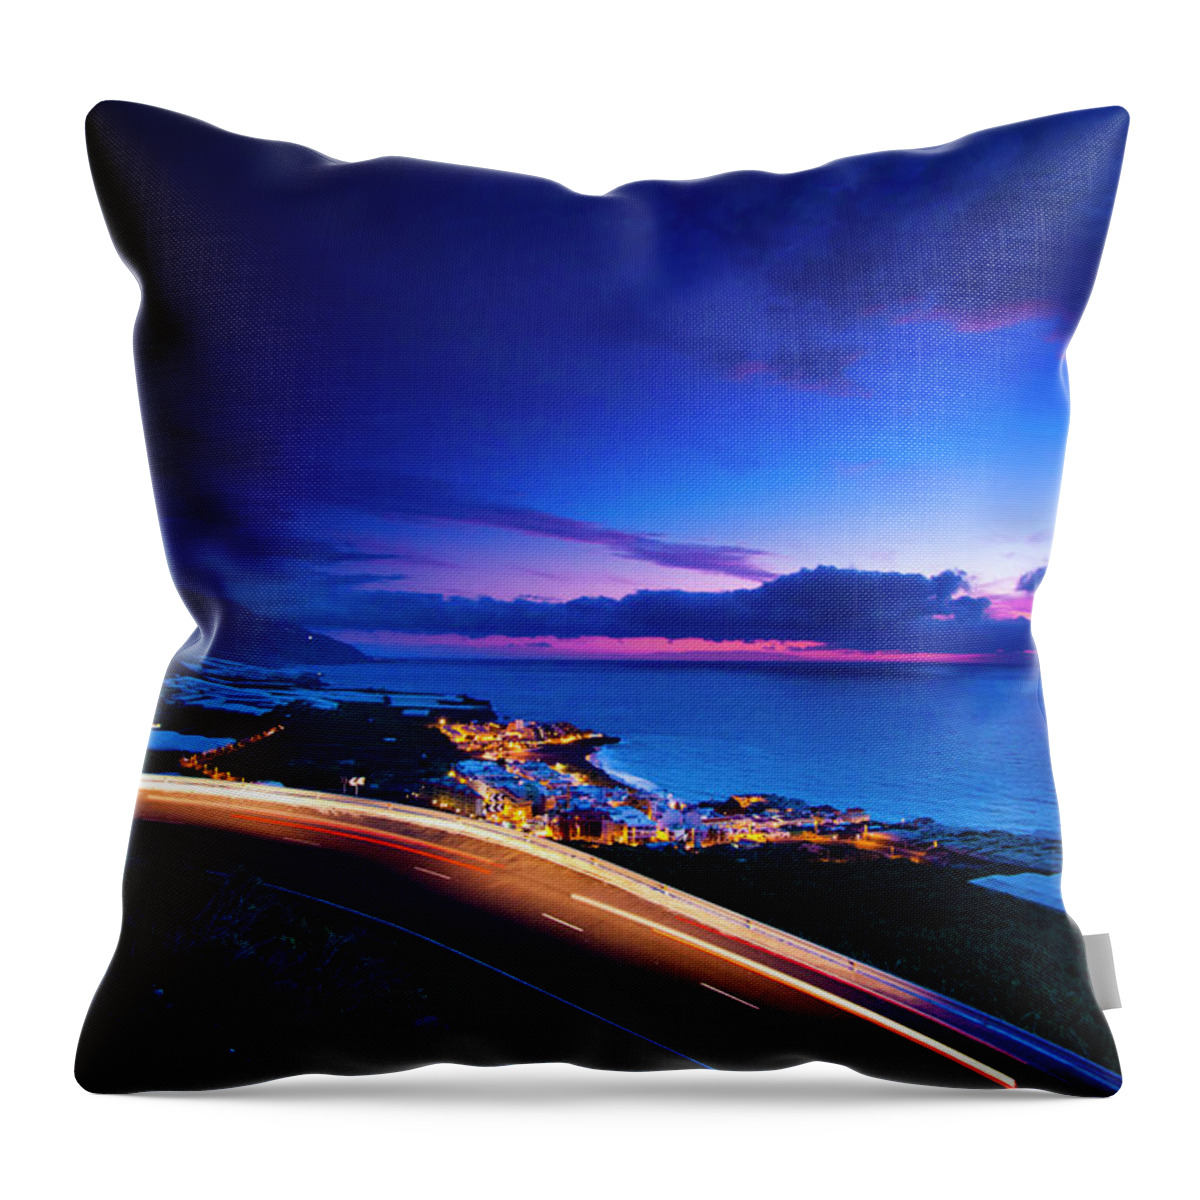 Water's Edge Throw Pillow featuring the photograph Coastline After Sunset by Schroptschop